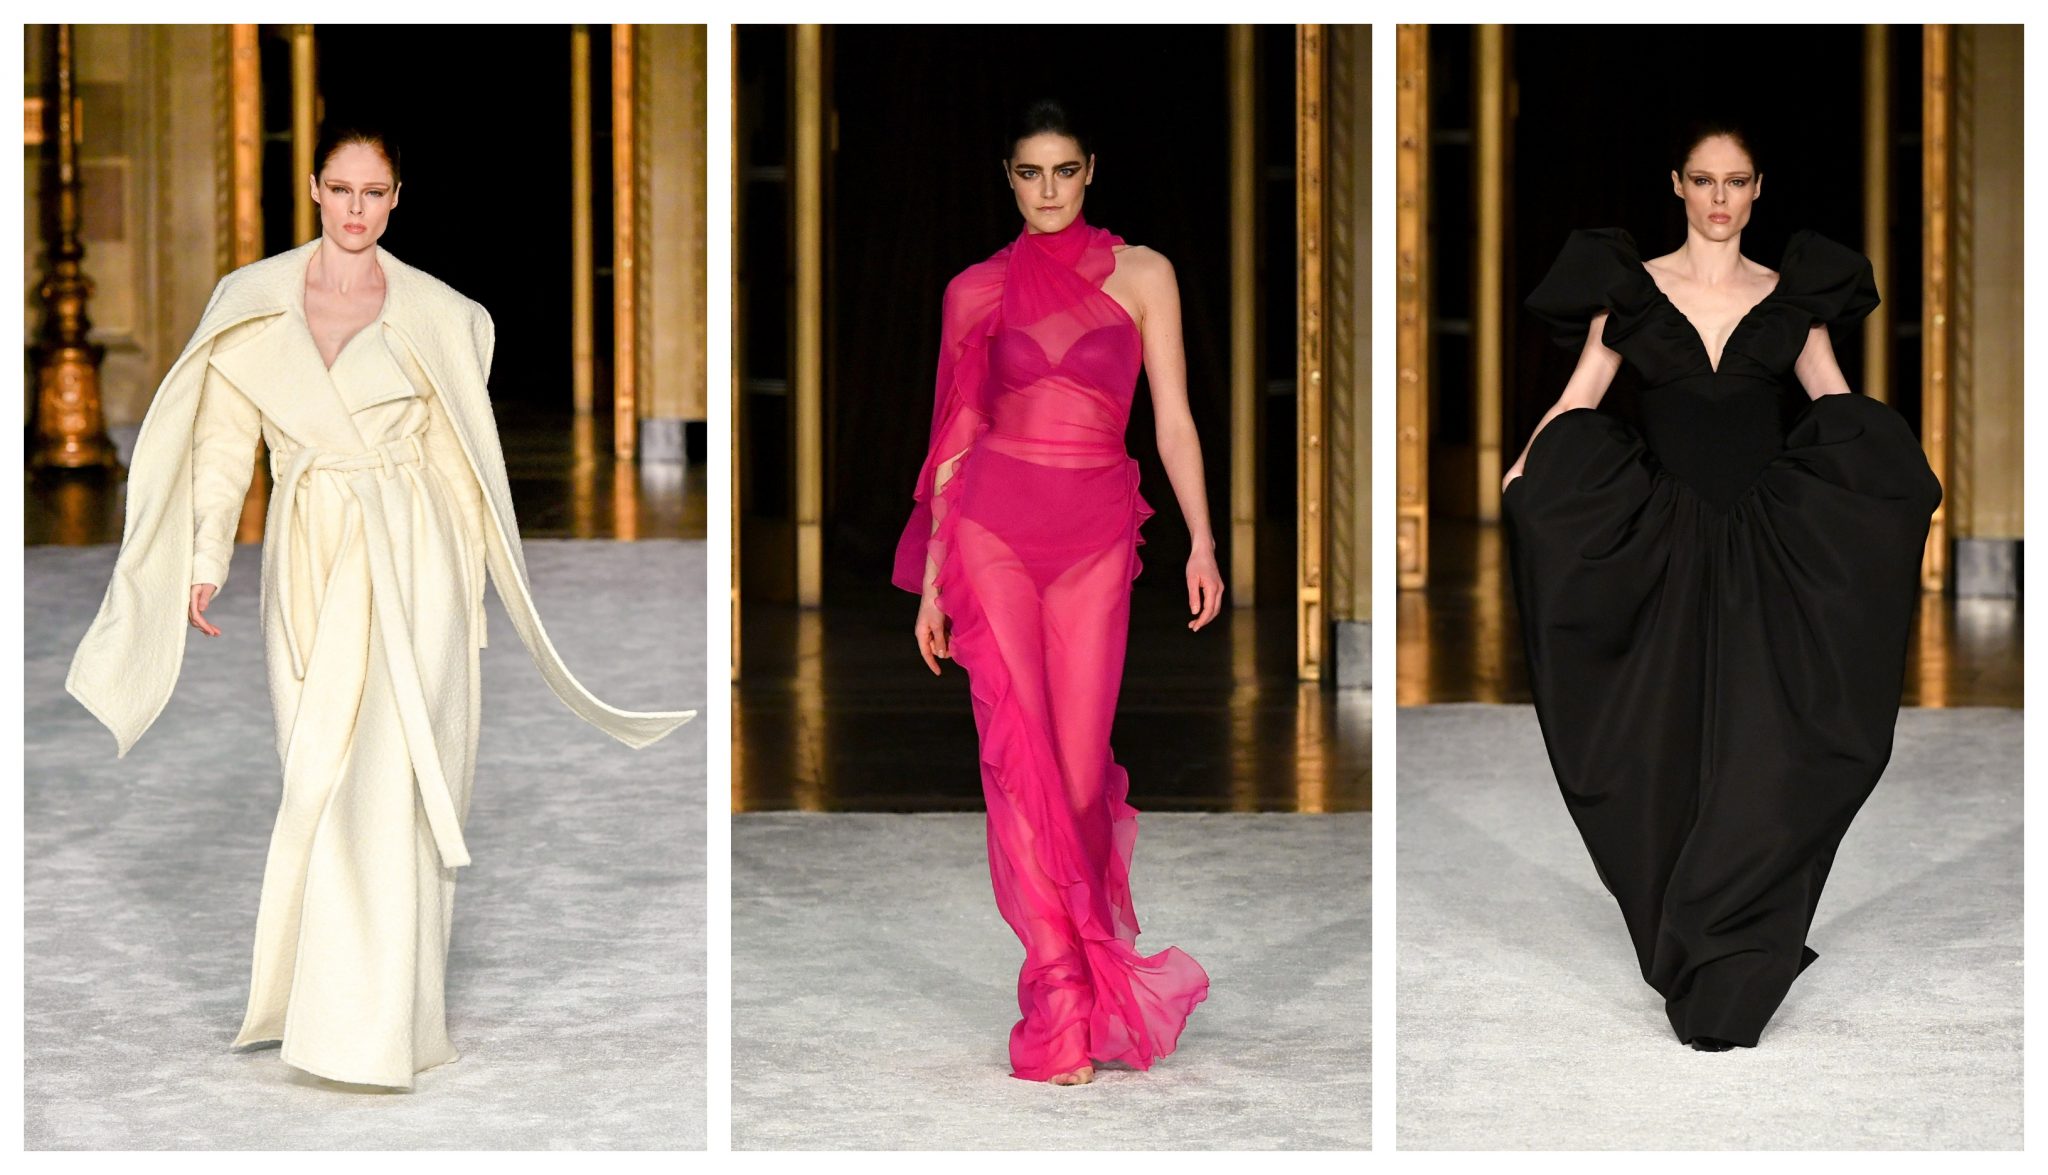 CHRISTIAN SIRIANO WOWS WITH HIS FALL / WINTER 2021 COLLECTION | THE ...